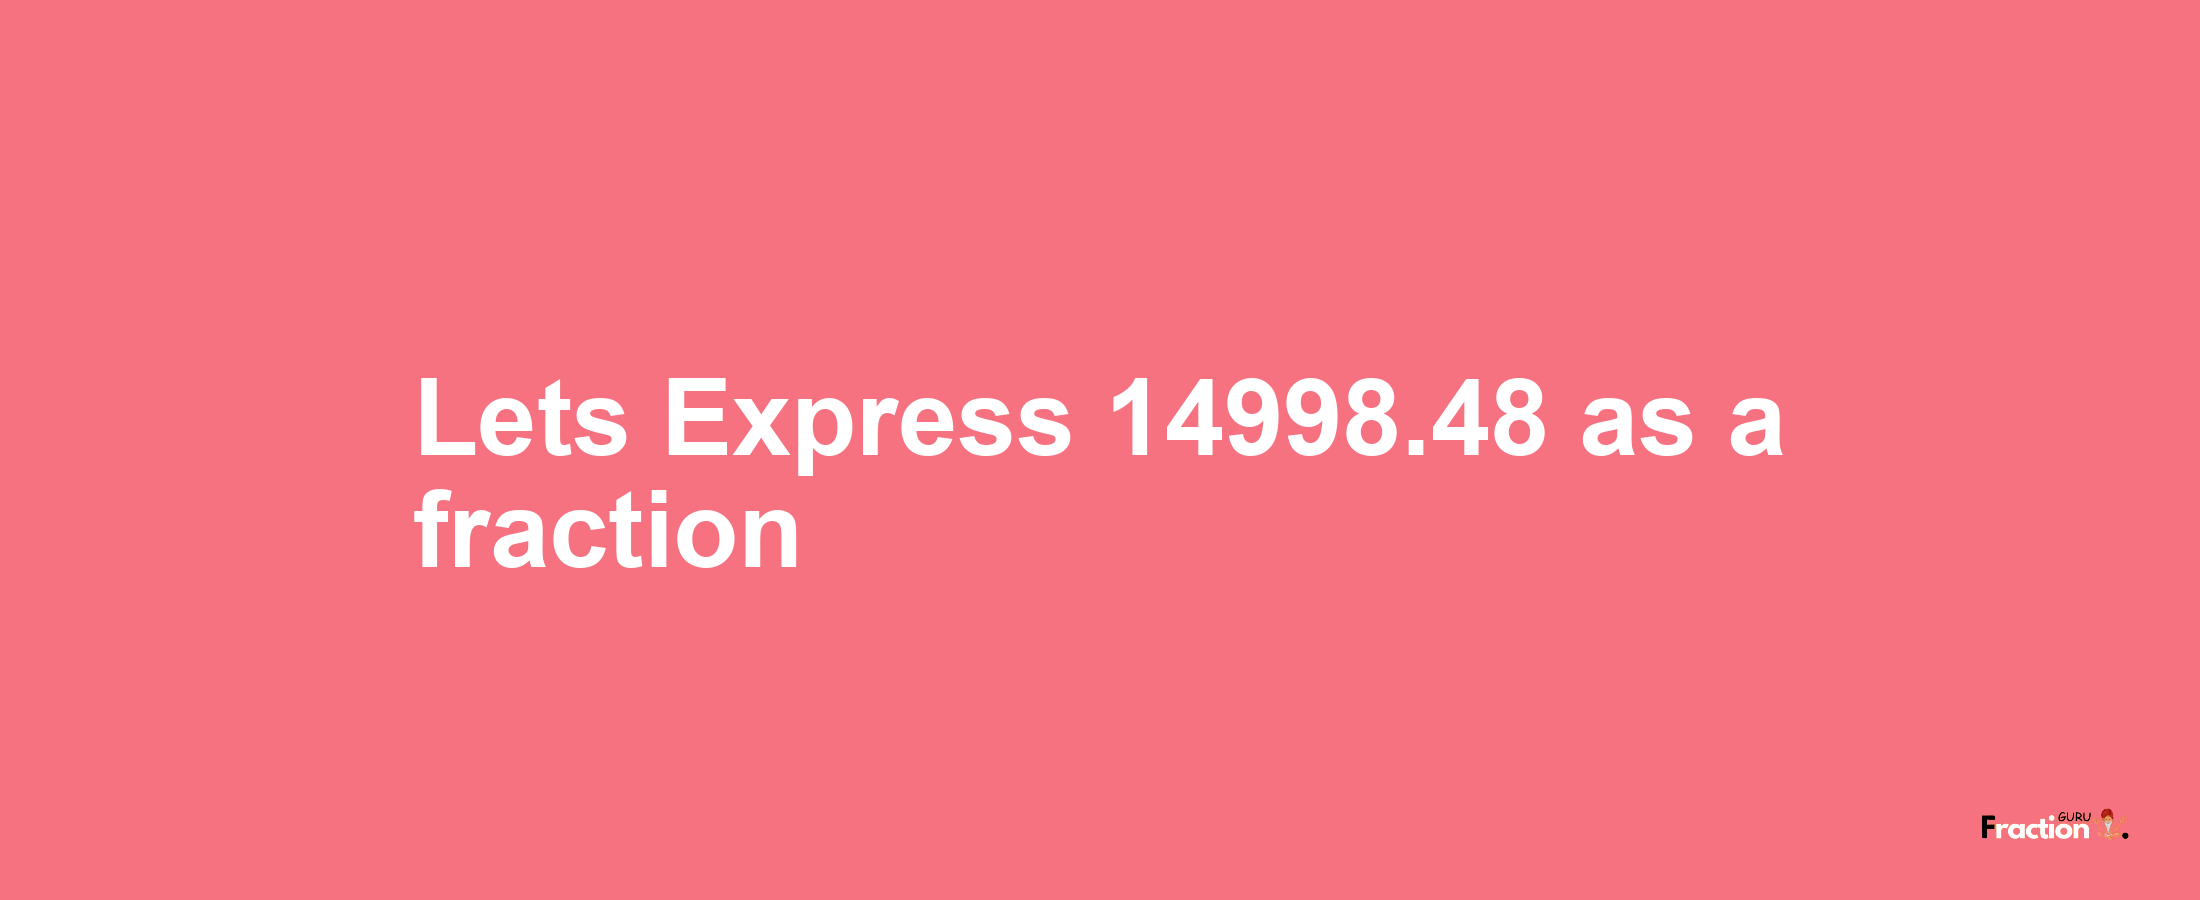 Lets Express 14998.48 as afraction